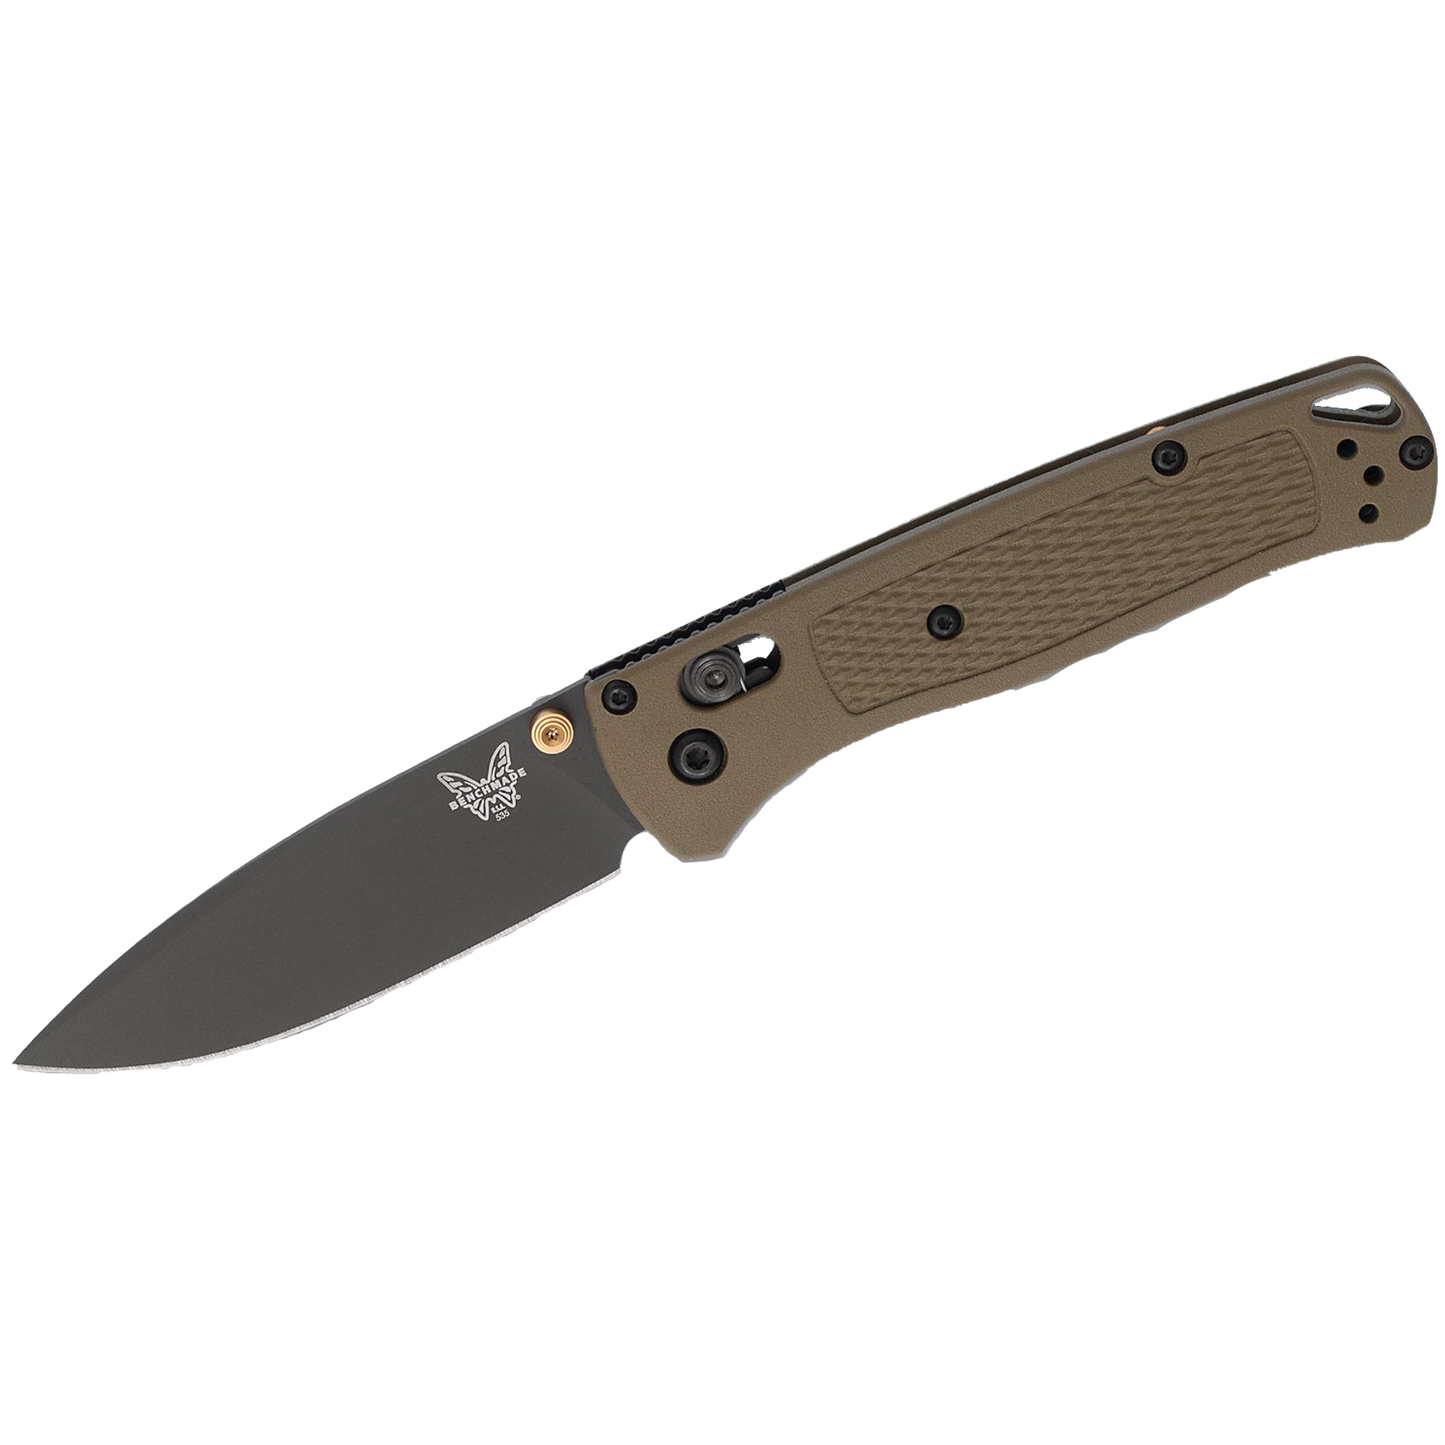 535GRY-1 Bugout AXIS Folding Knife 3.24" S30V Smoked Gray Plain Blade, Ranger Green Grivory Handles